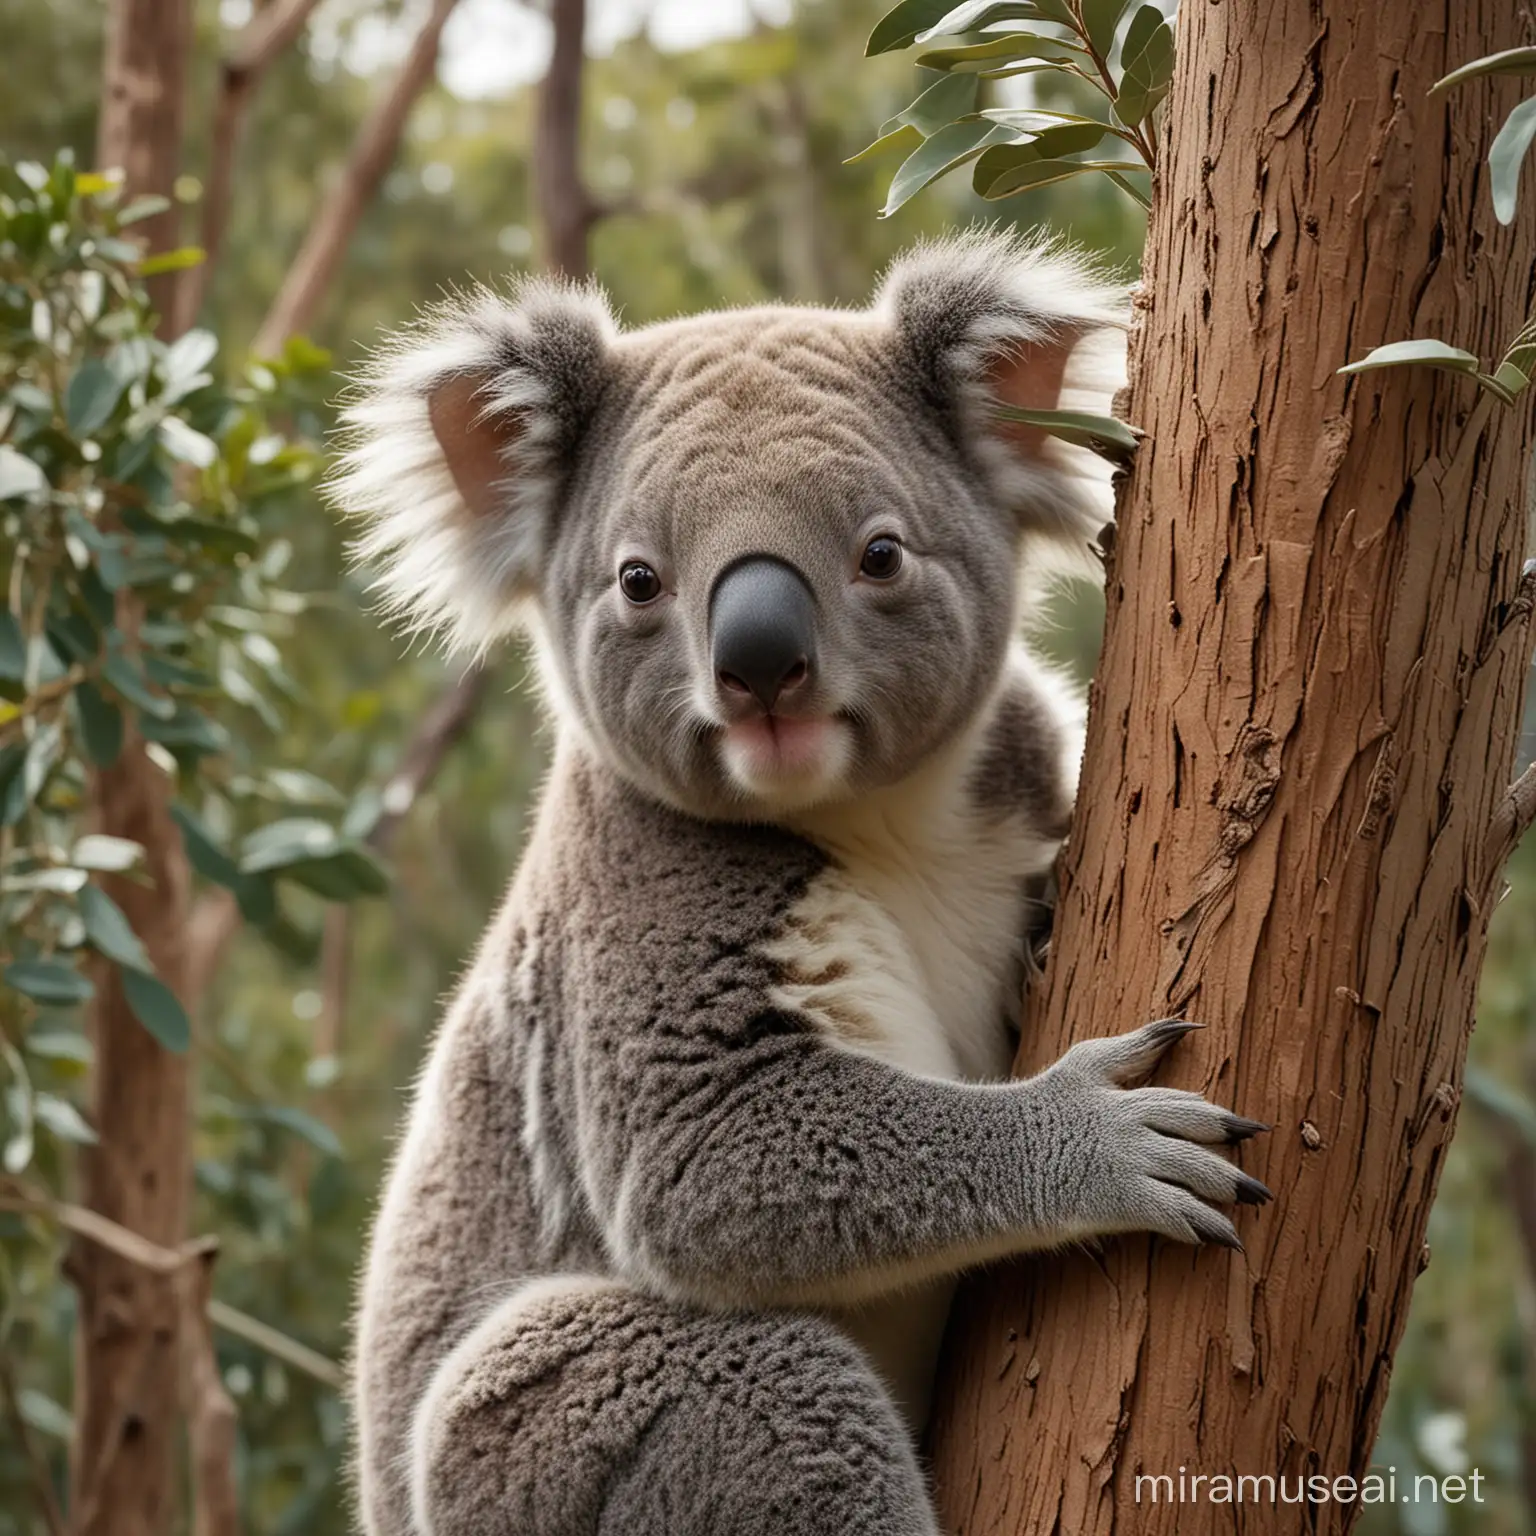 imagine a koala clinging to a eucalyptus tree in the Australian bush. The medium is photorealistic, capturing the cuteness and calmness of the koala, the rough texture of the tree, and the dry landscape of the bush. The style is reminiscent of wildlife photography by Robert Irwin, with a focus on the unique fauna of Australia. The lighting is bright and clear, emphasizing the koala and the eucalyptus tree. The colors are natural and muted, with a palette of gray, green, and brown. The composition is shot with a Nikon D6, using a Nikon AF-S NIKKOR 200-500mm